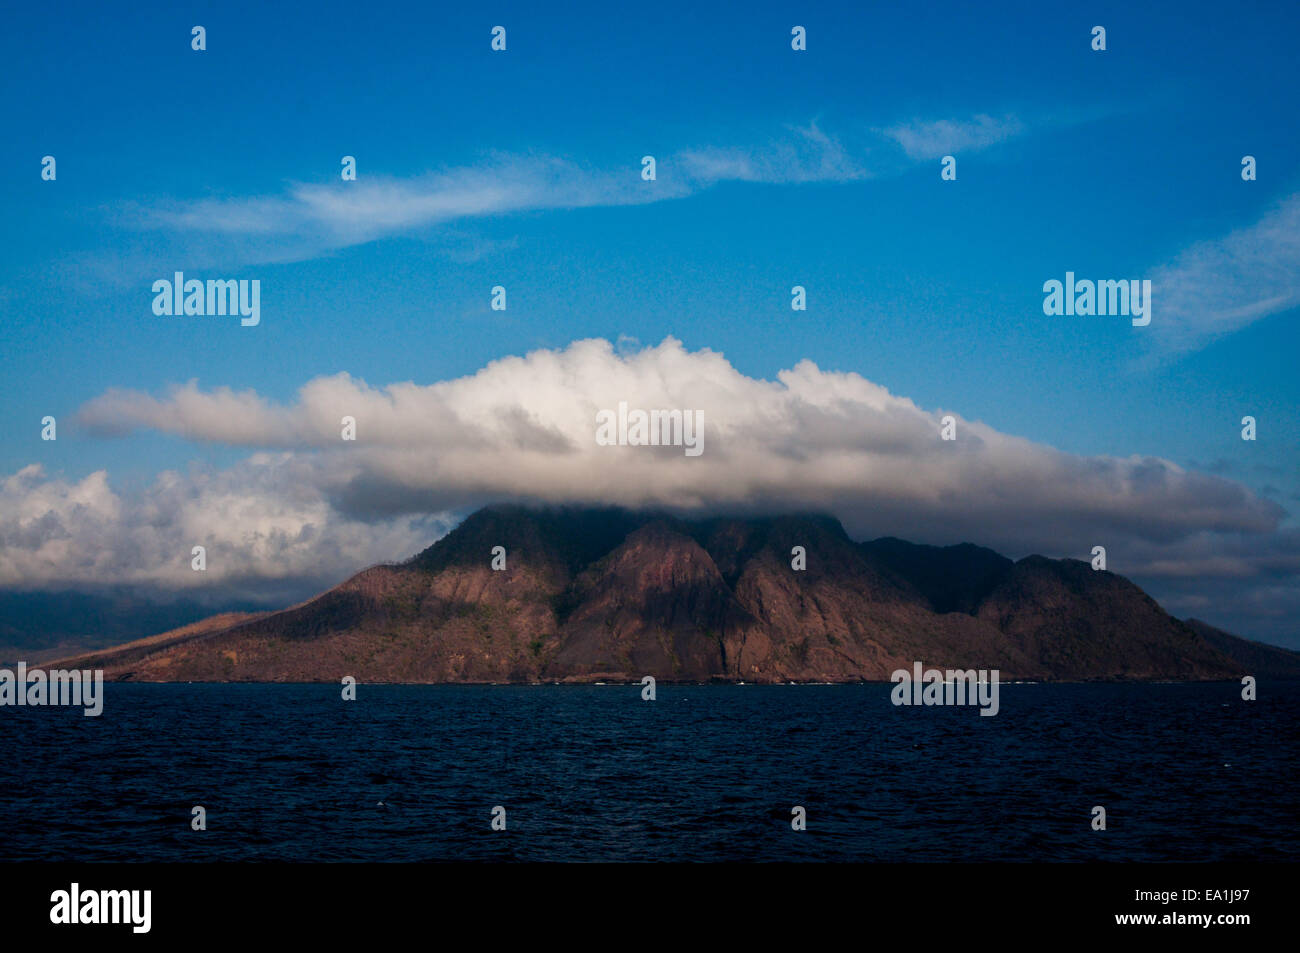 Mountainous part of Lembata Island is seen from a ferry that is sailing to Kupang (Timor Island) in East Nusa Tenggara province of Indonesia. Stock Photo